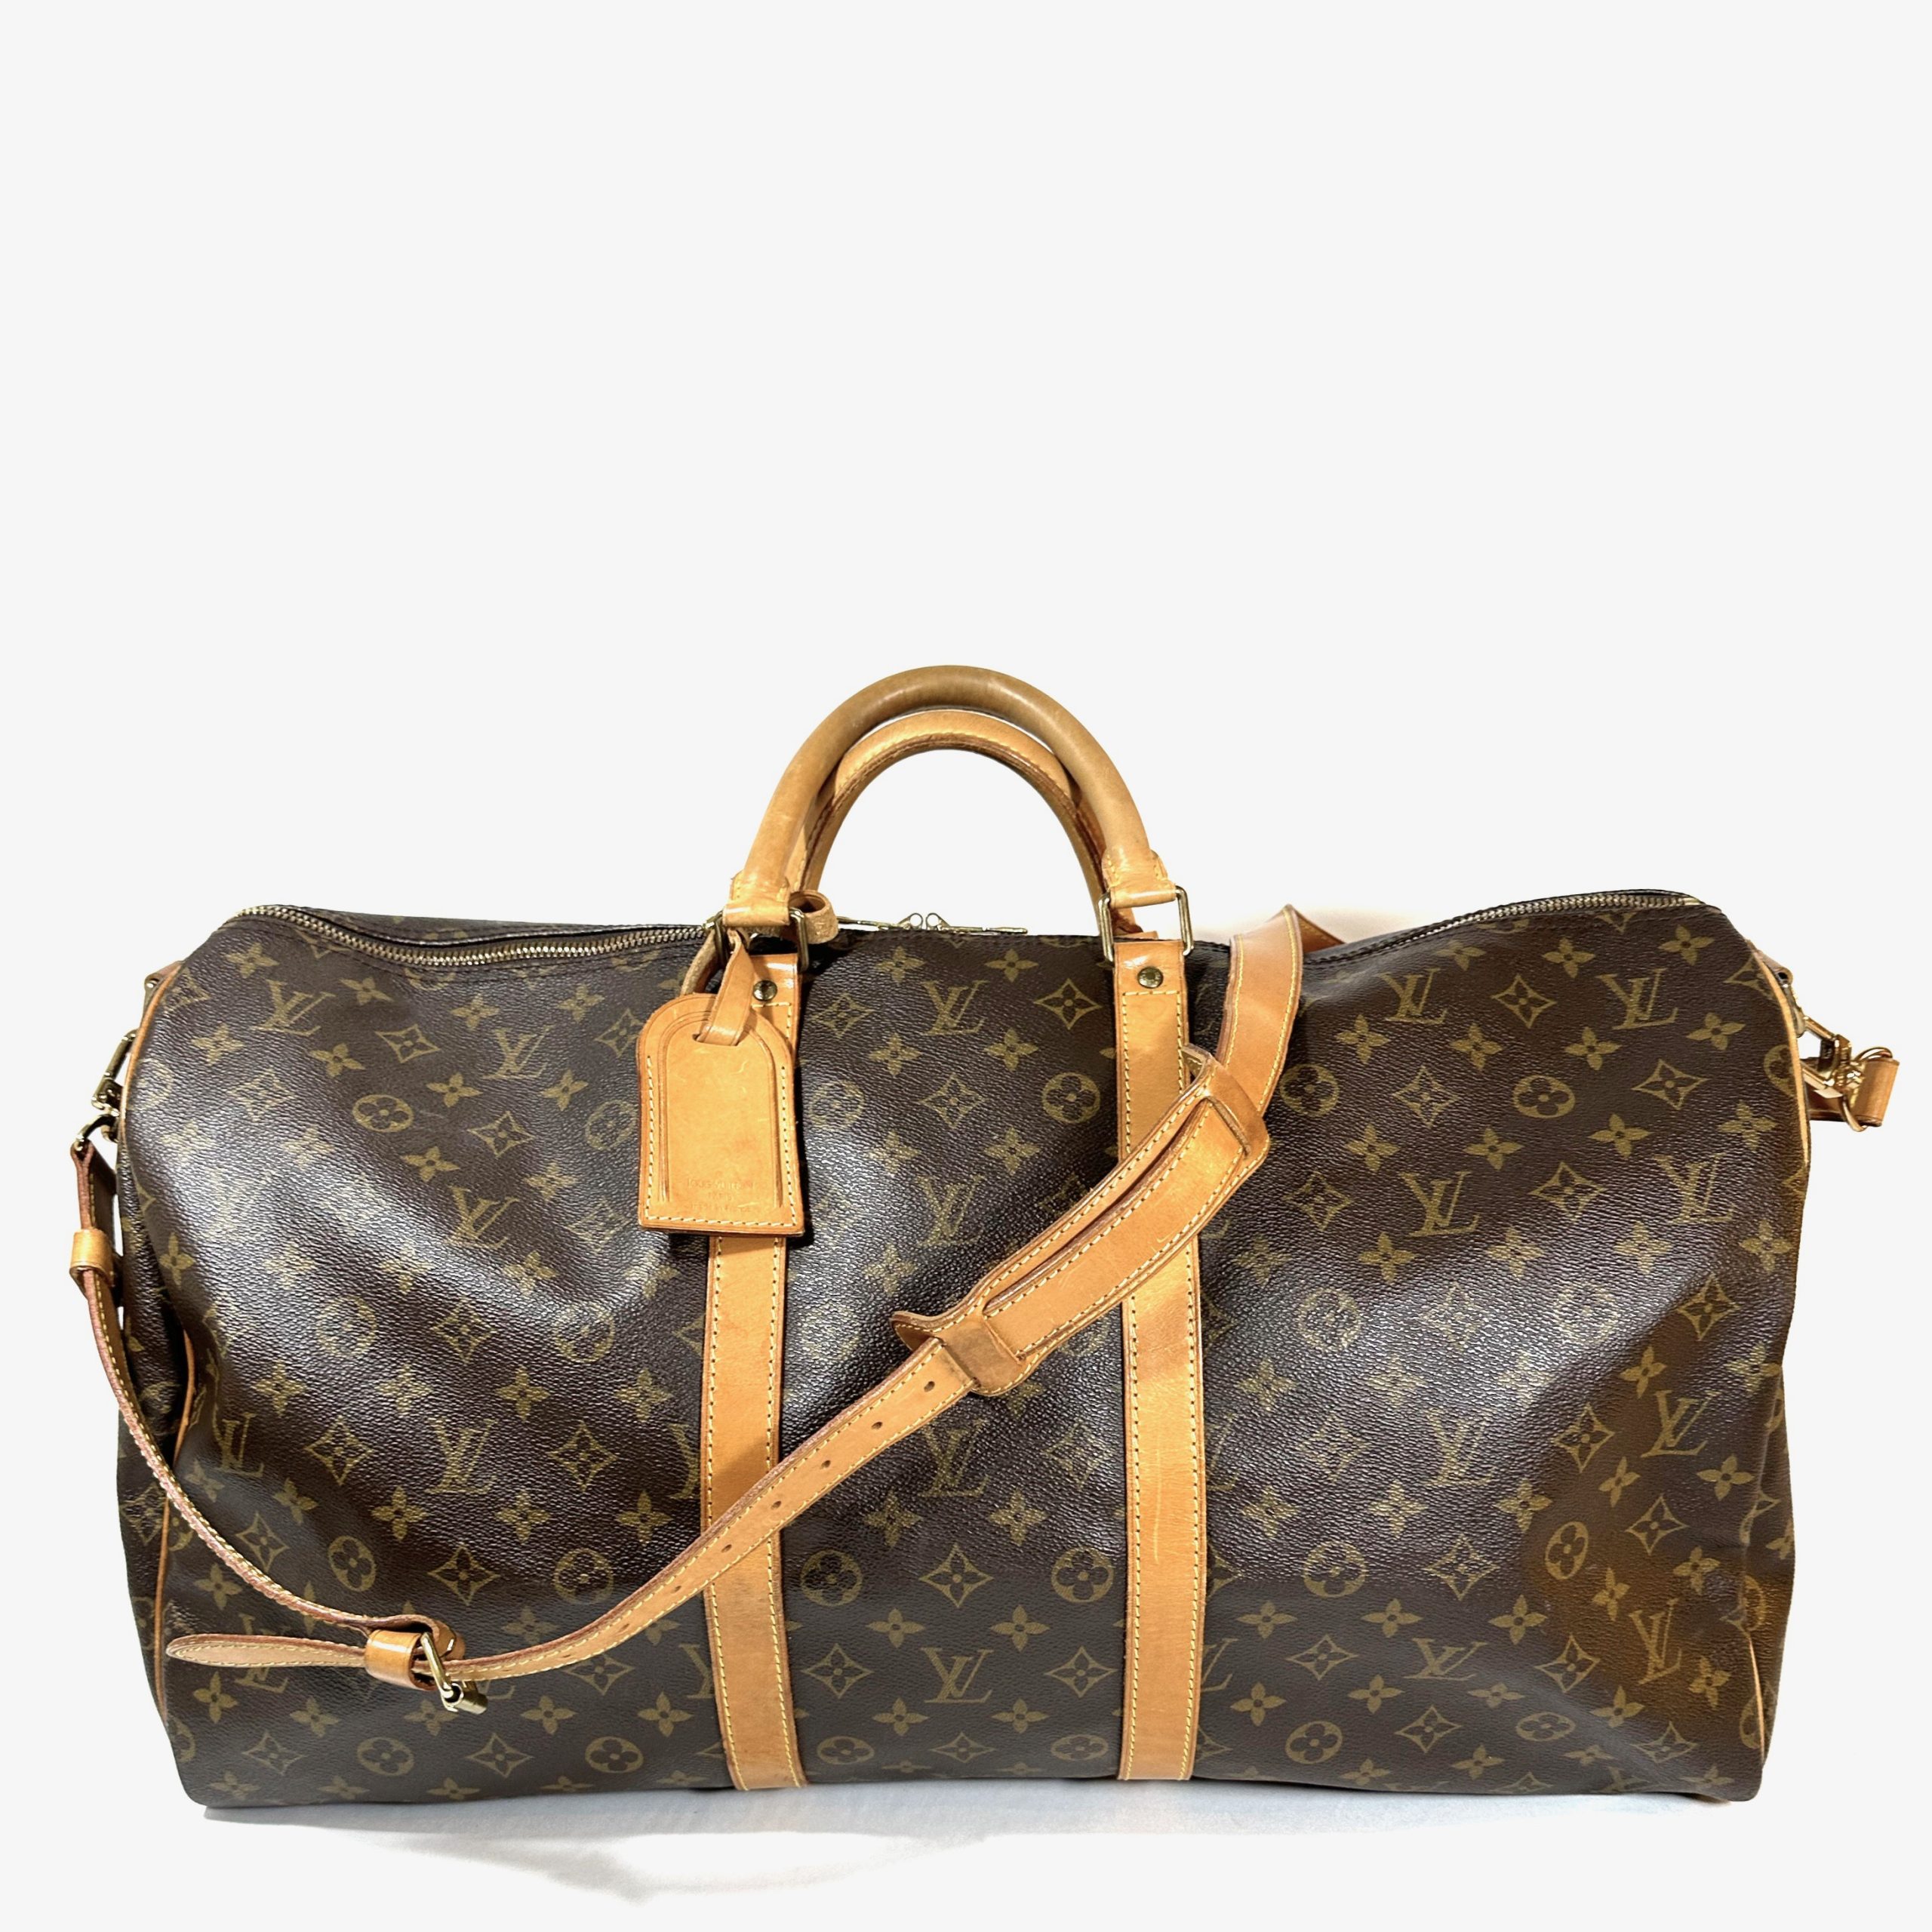 Louis Vuitton lady's luxury travel handbag detail scarf and